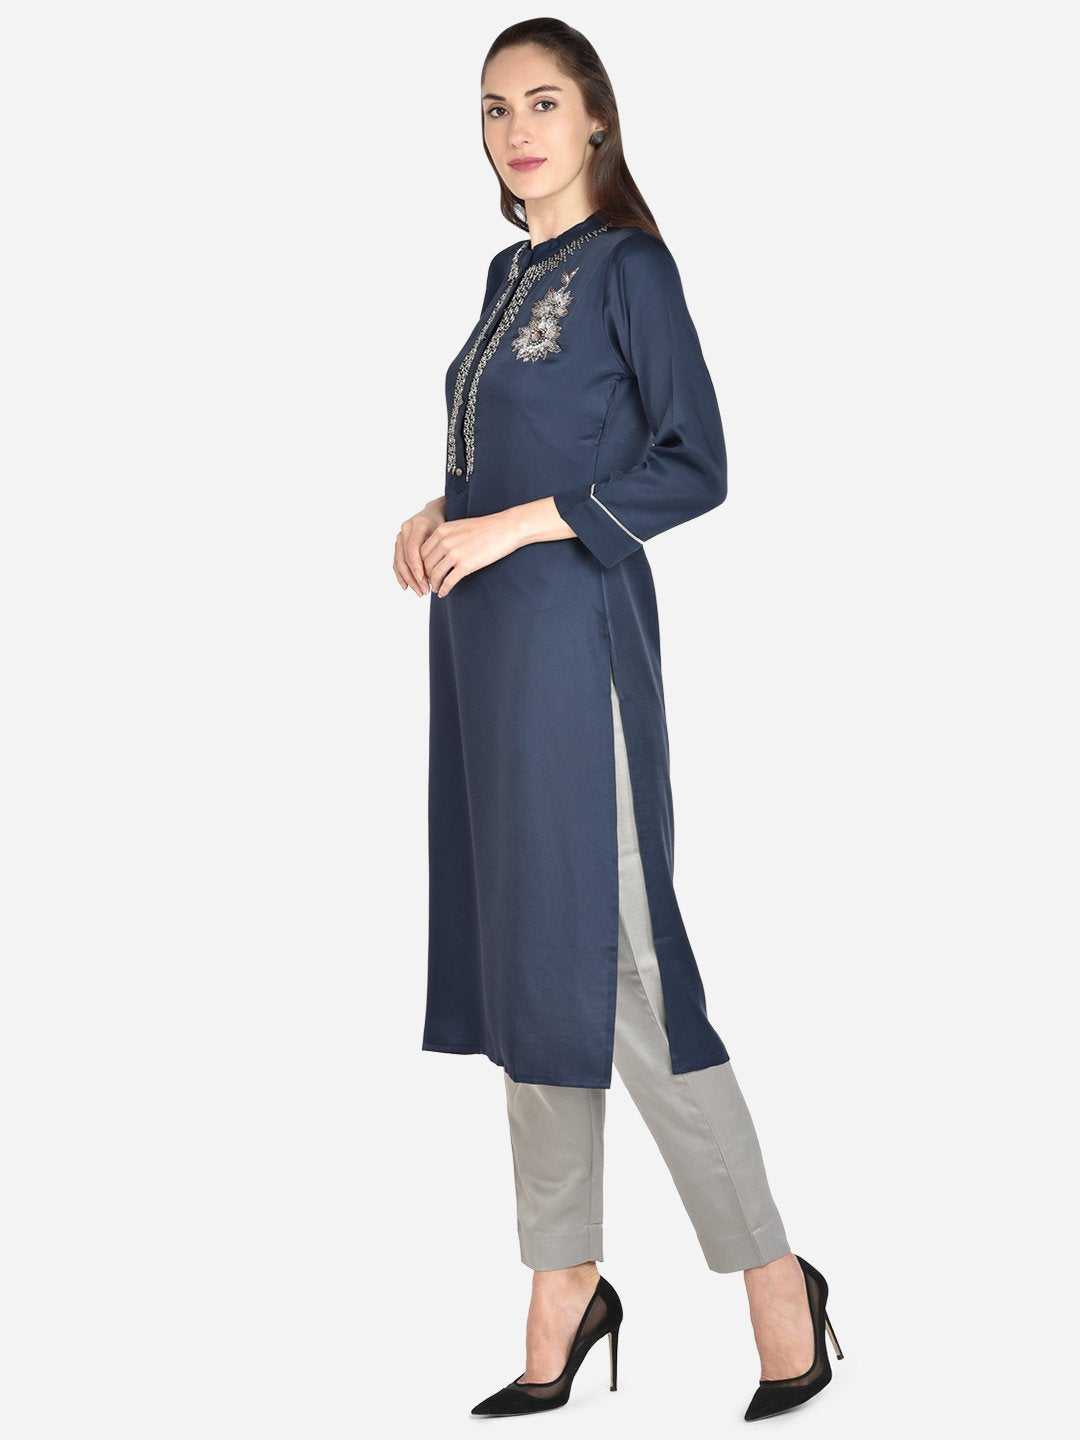 It Way Of Life - Blue Solid Woven Kurti